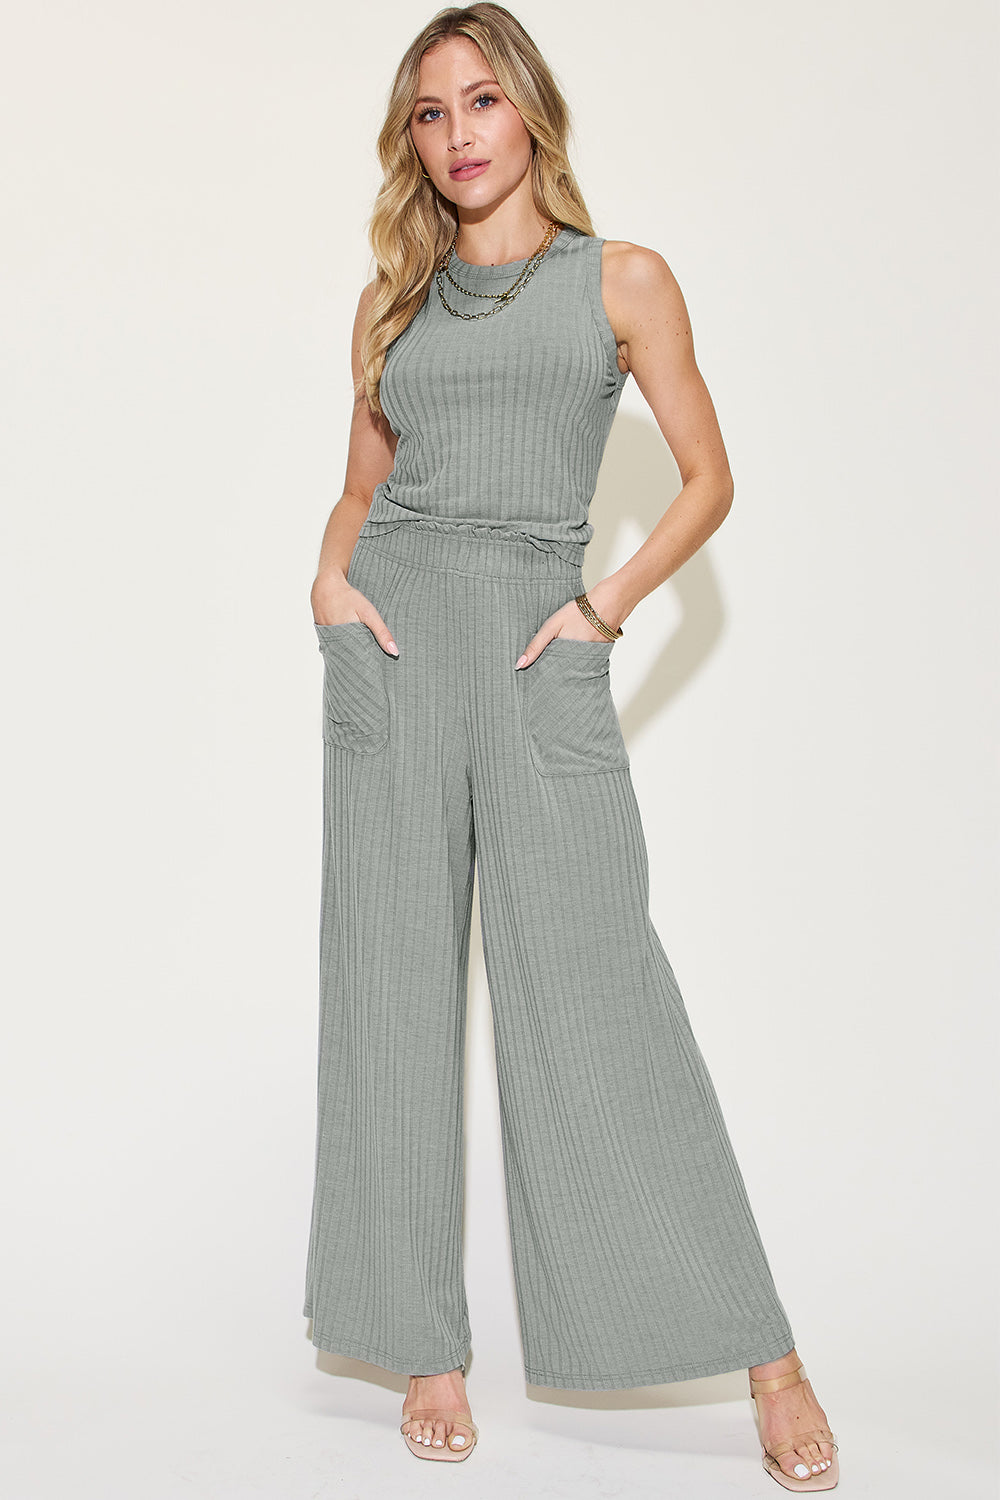 Bailey Bae Full Size Ribbed Tank and Wide Leg Pants Set